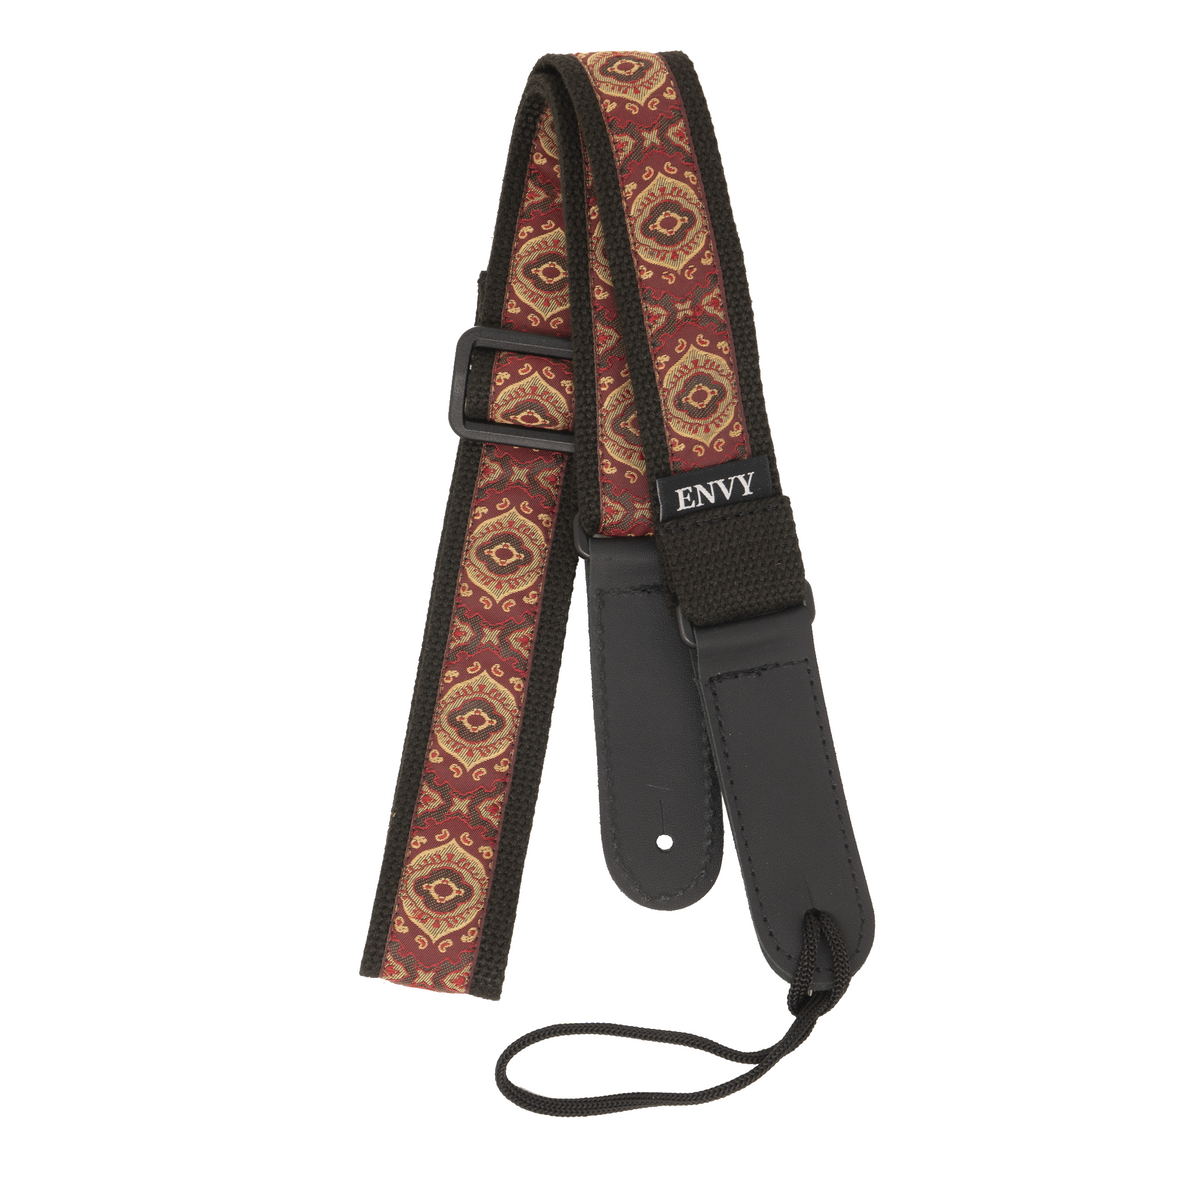 My Fave Mandolin Strap in Renaissance Red